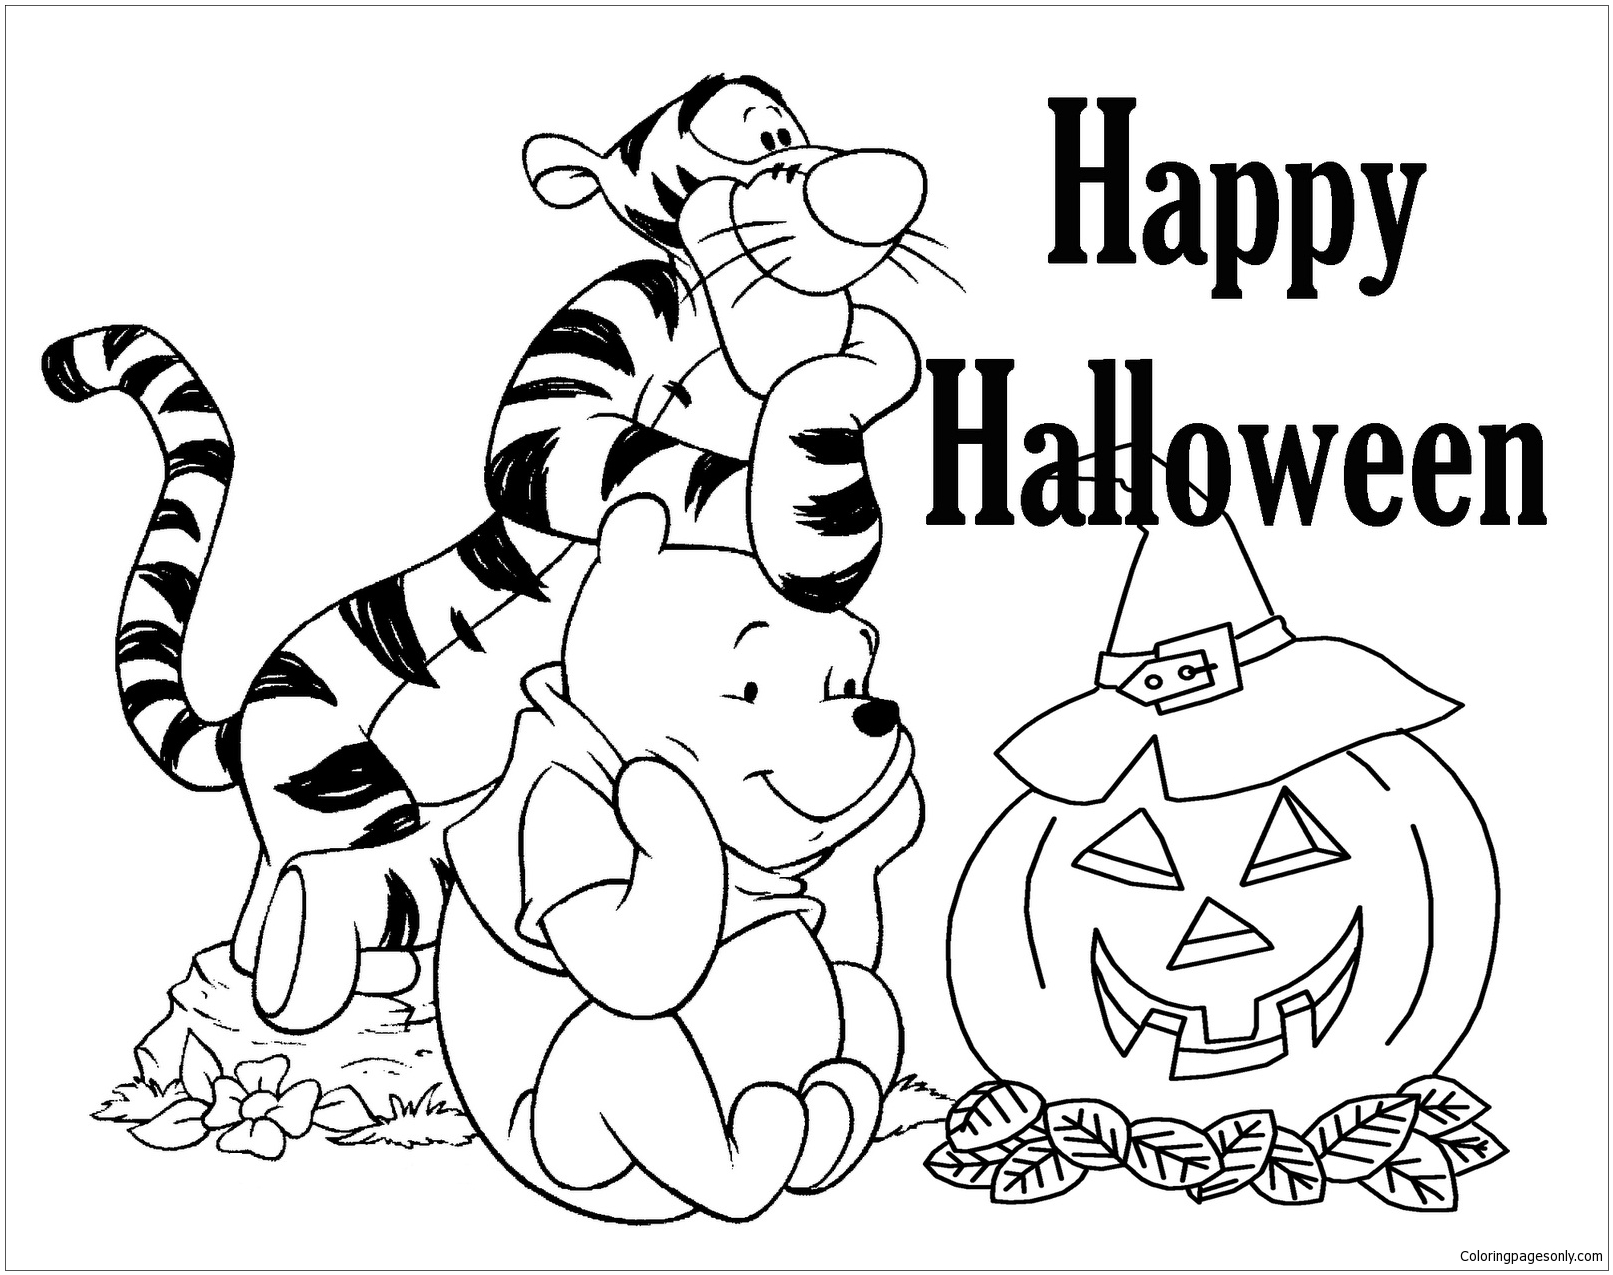 Happy Halloween Colouring Pages Halloween Colorings